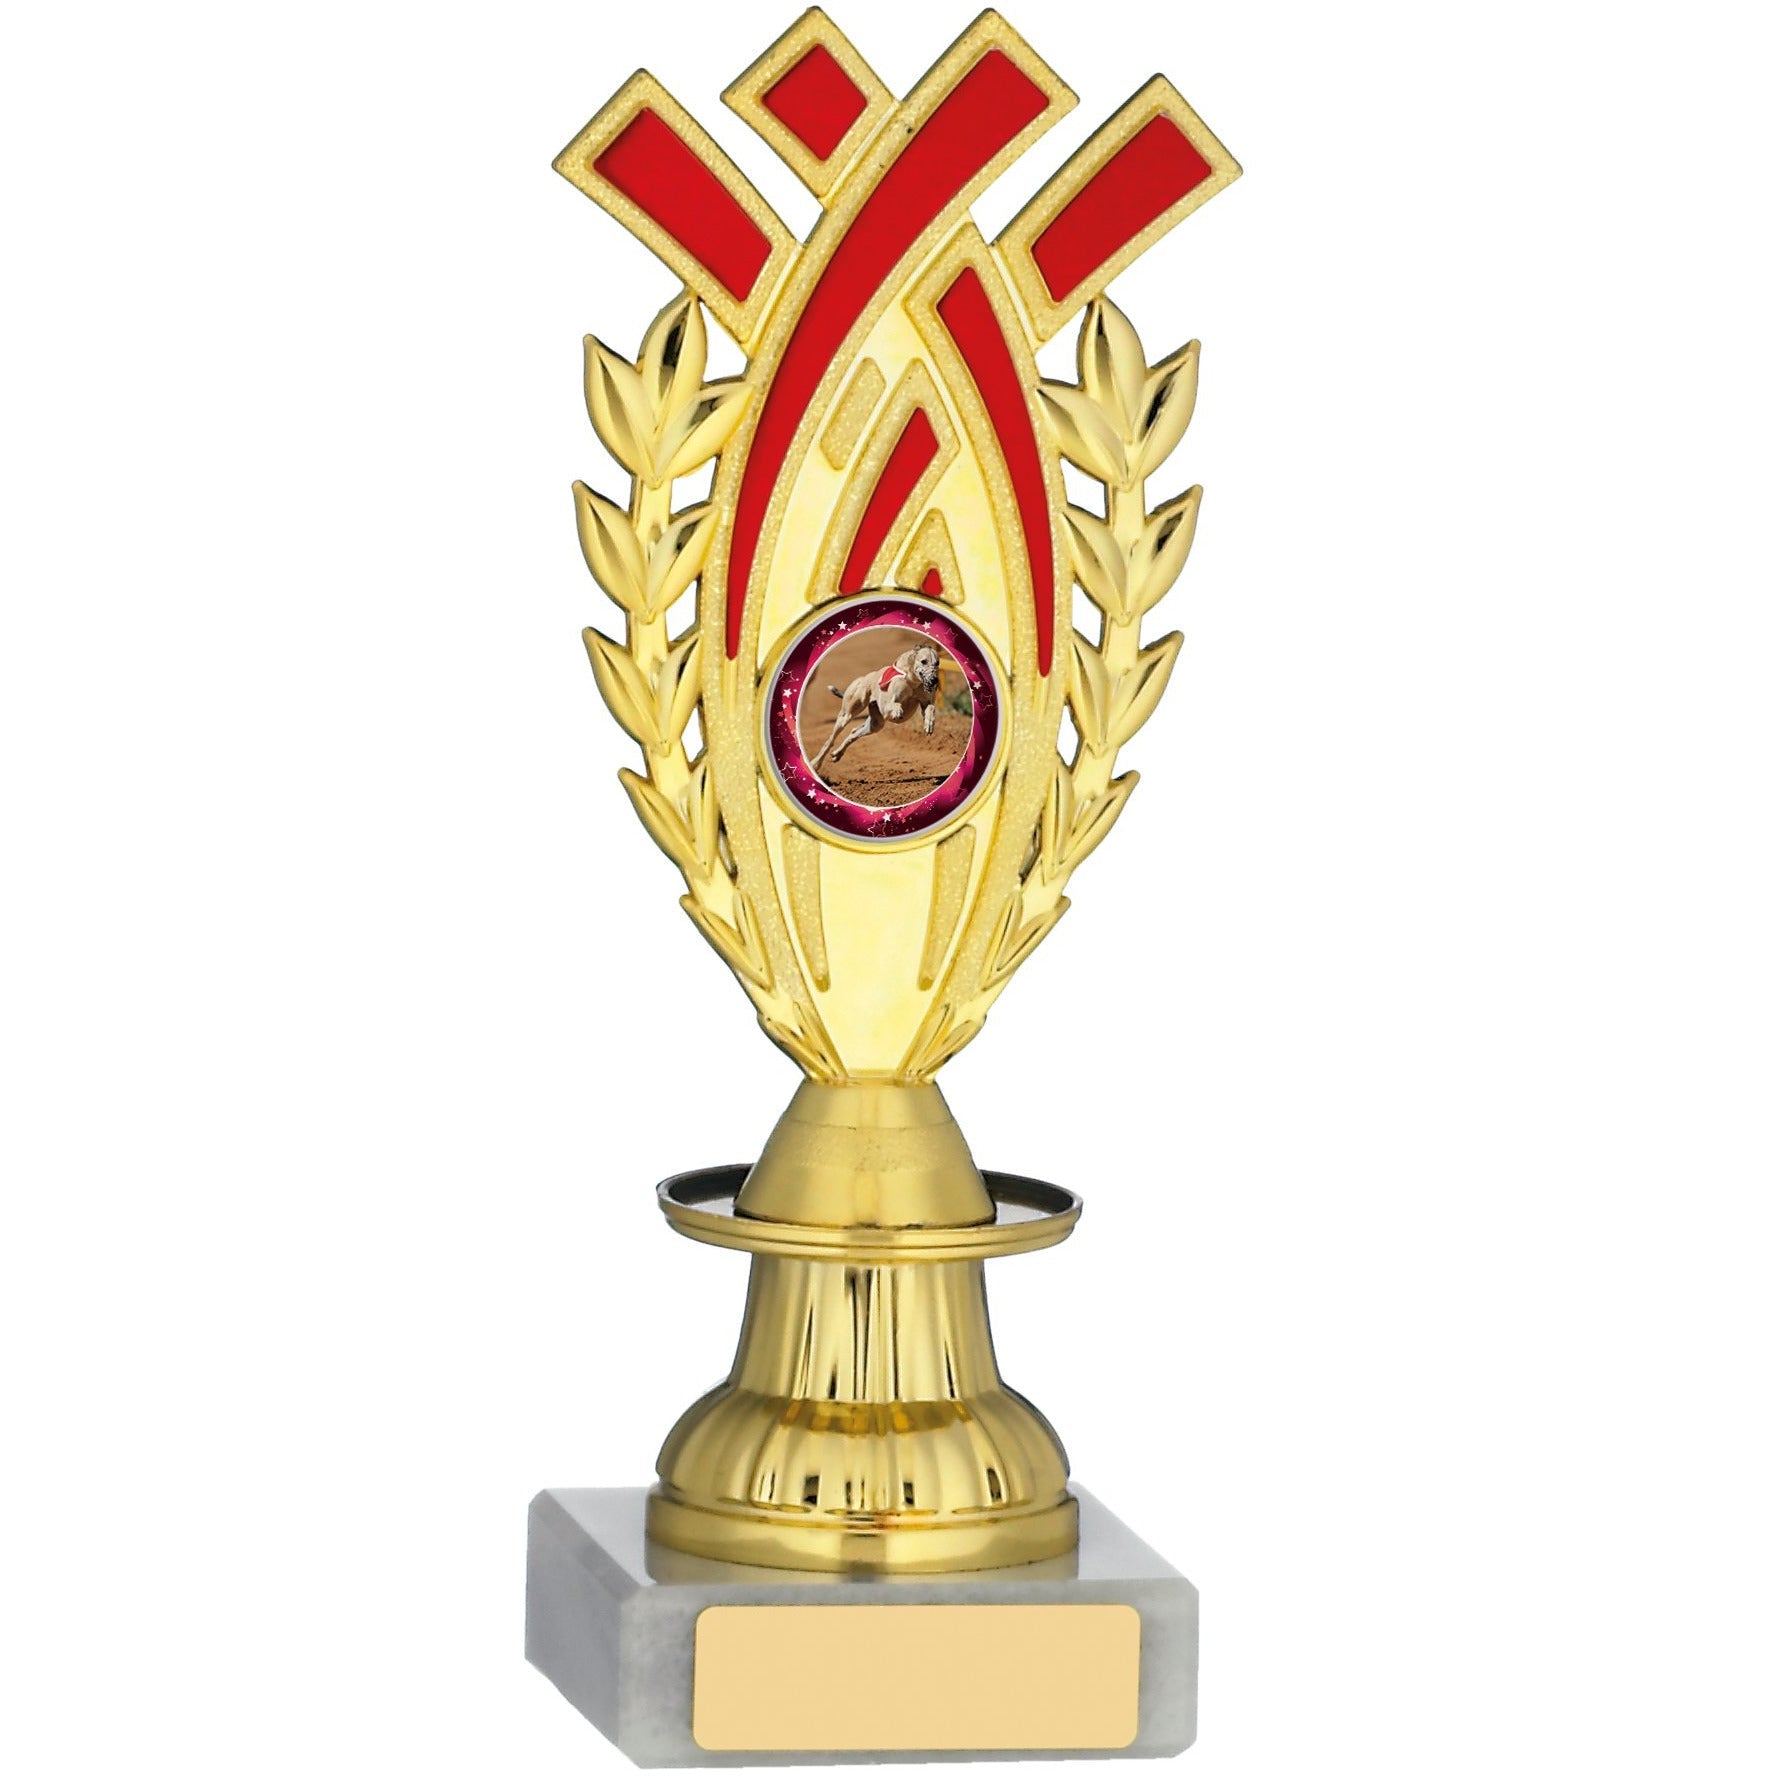 Gold And Red Wreath Recognition Award on Marble Base